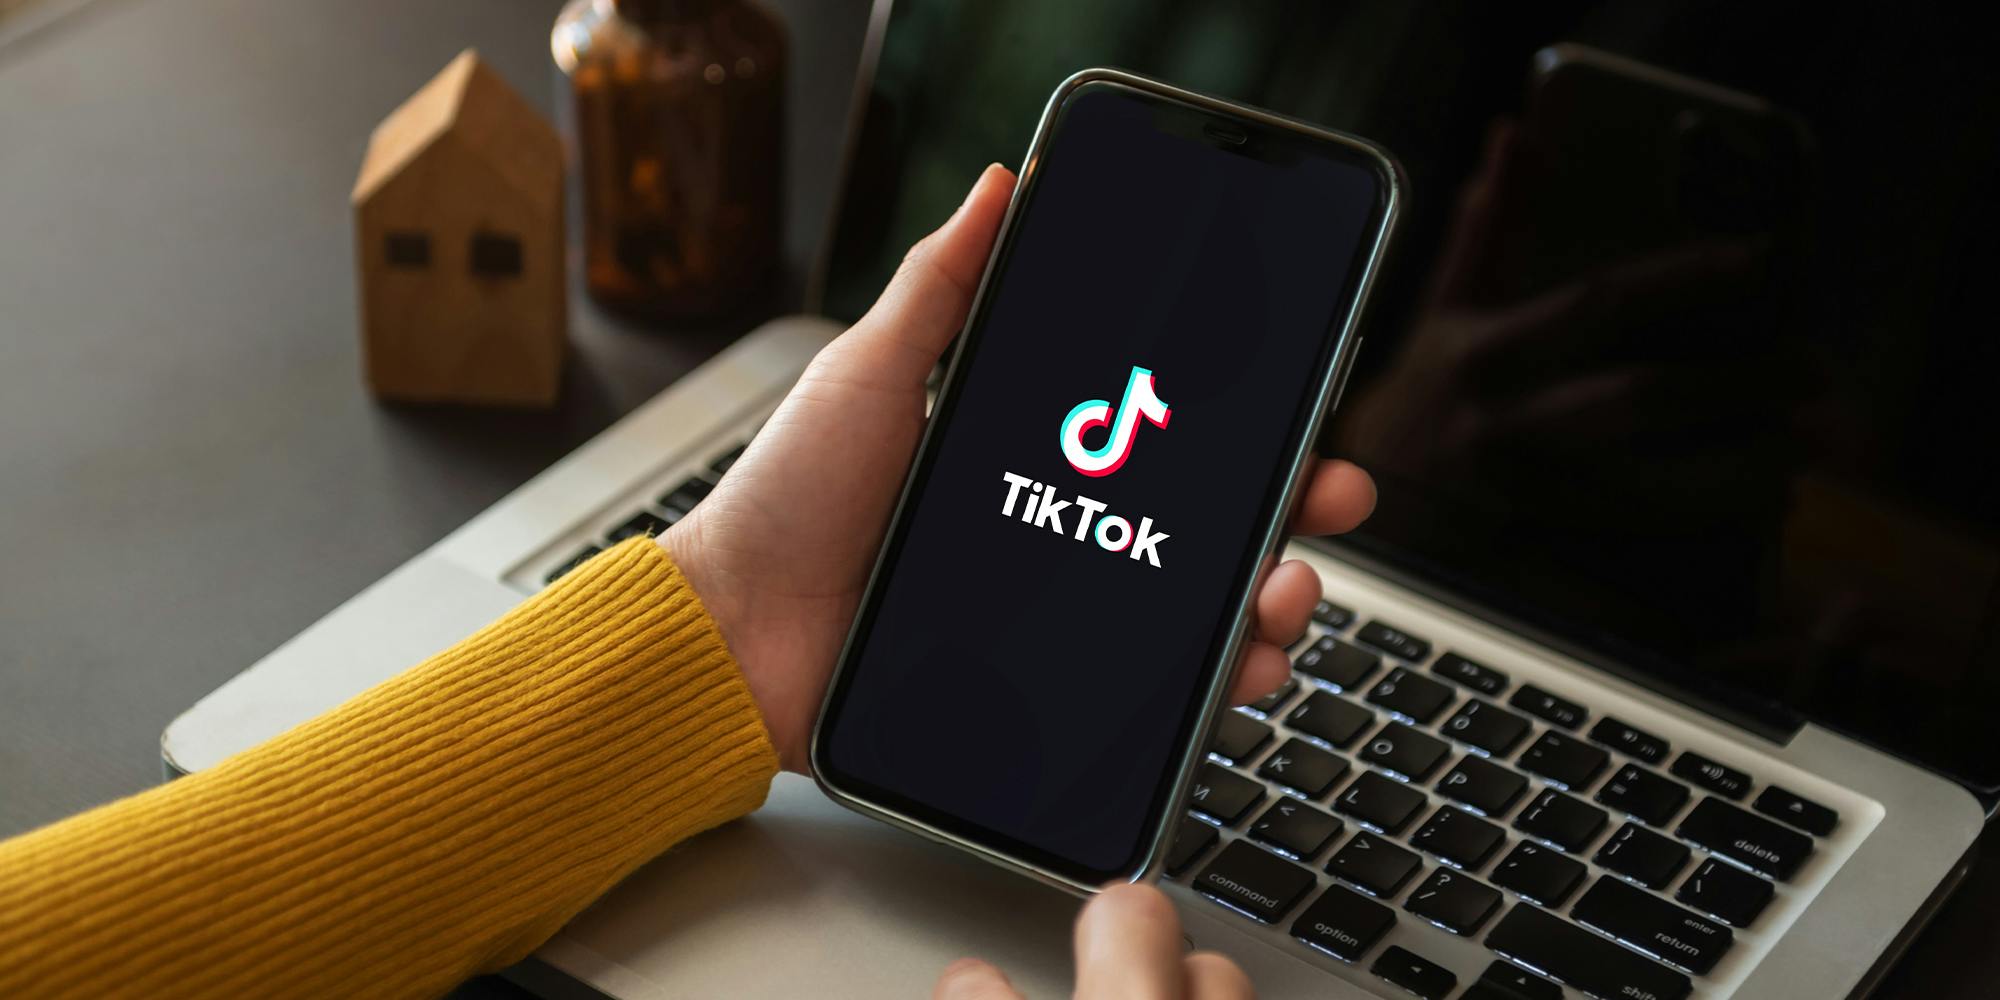 Closed up image of a Female using TikTok application on a smartphone in home.